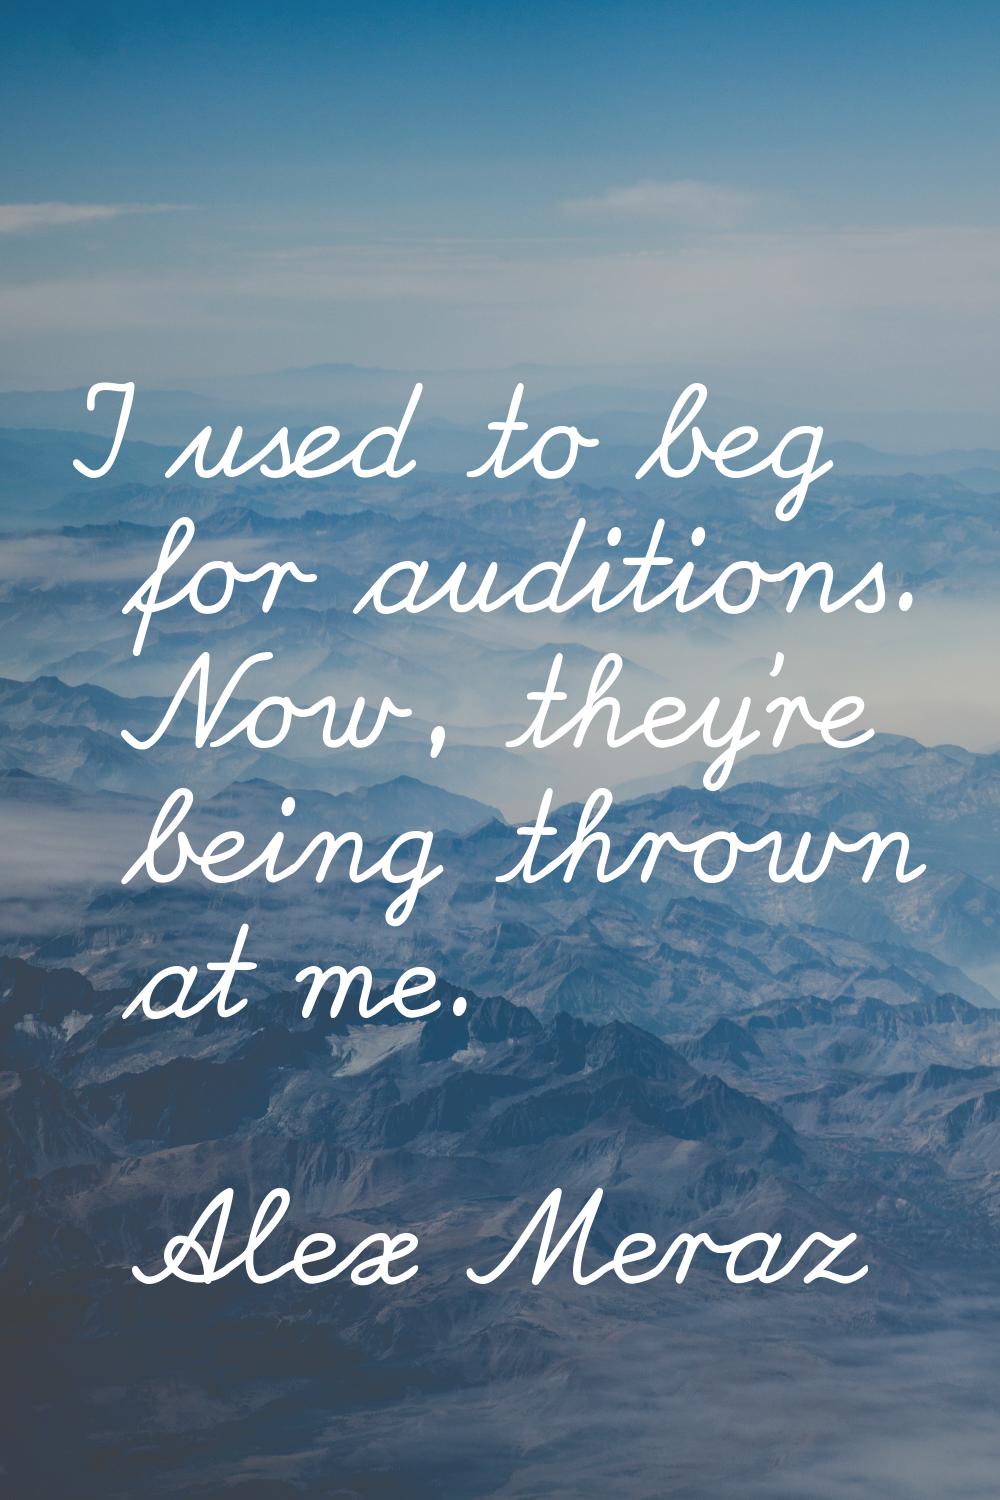 I used to beg for auditions. Now, they're being thrown at me.